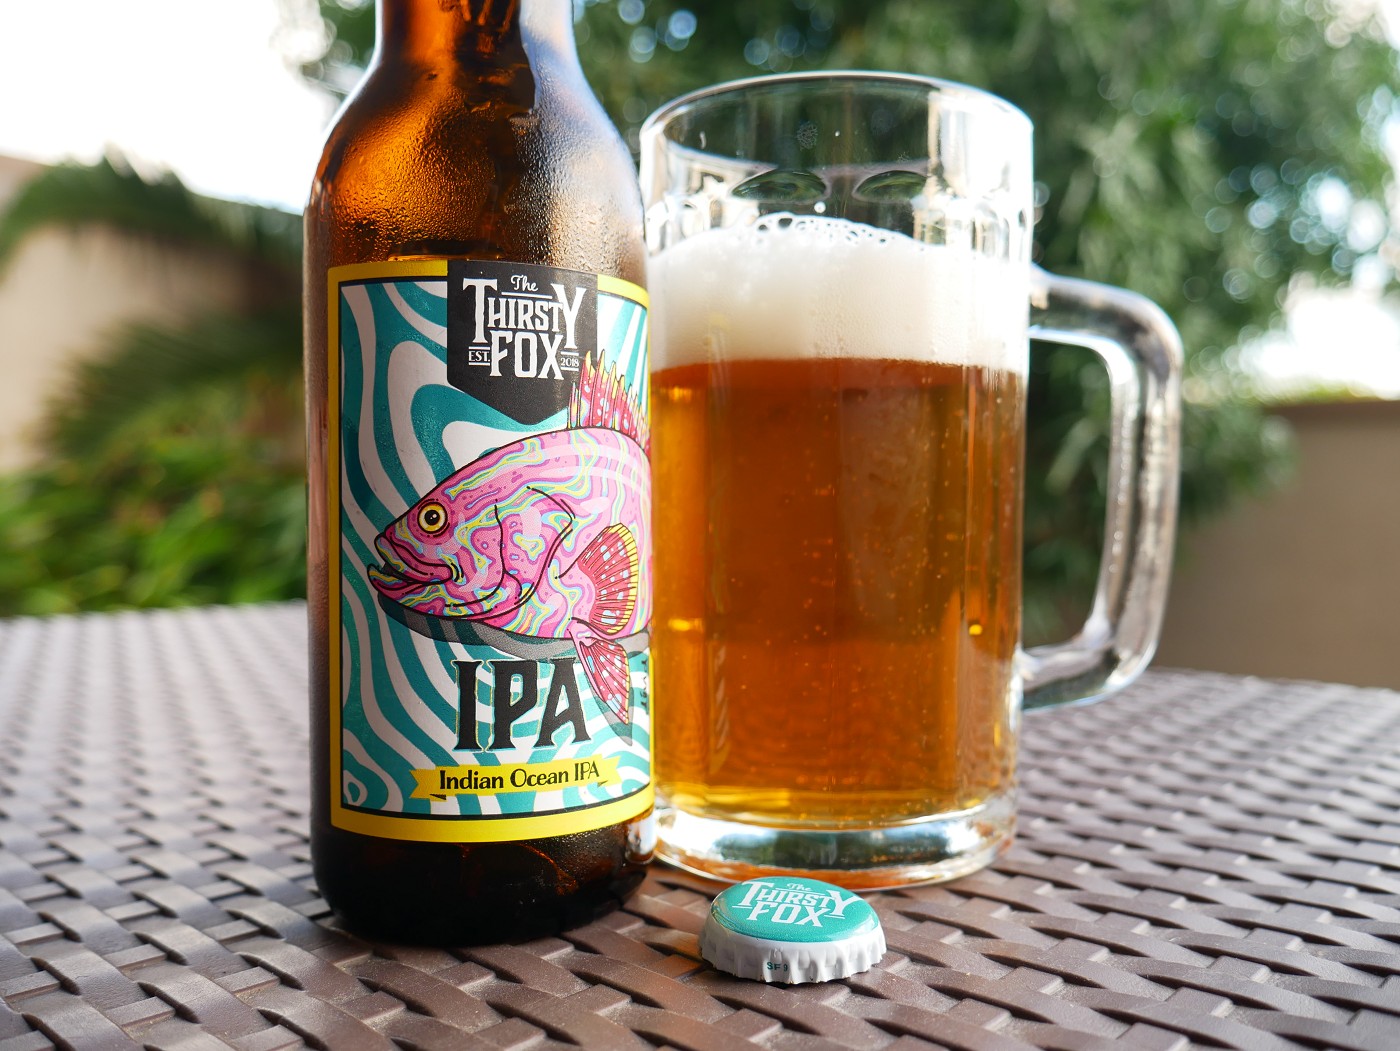 Indian Ocean IPA the thirsty fox Mauritius